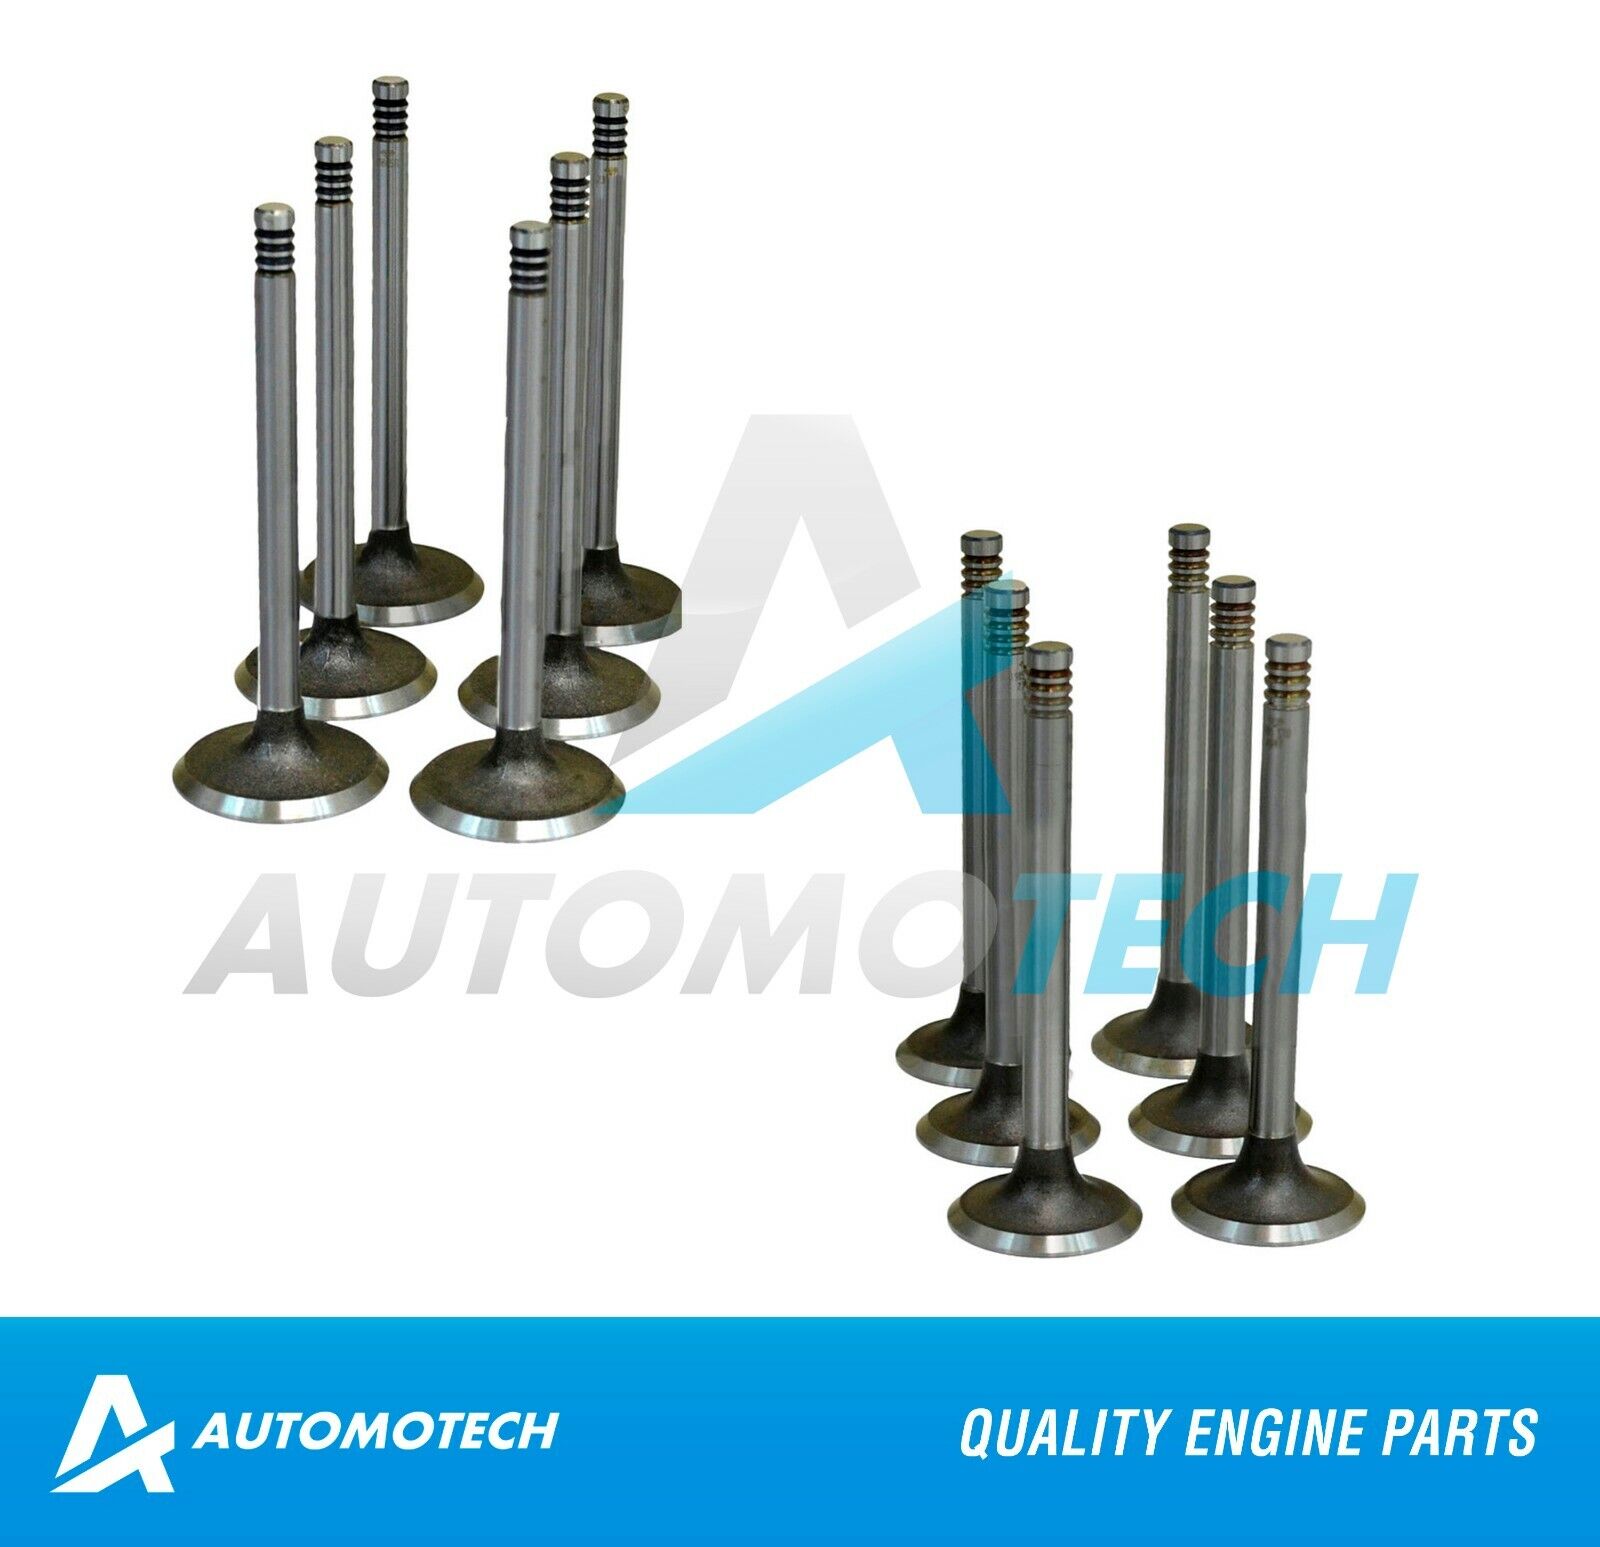 Intake and Exhaust valves 3.8 L for Ford Mercury Capri